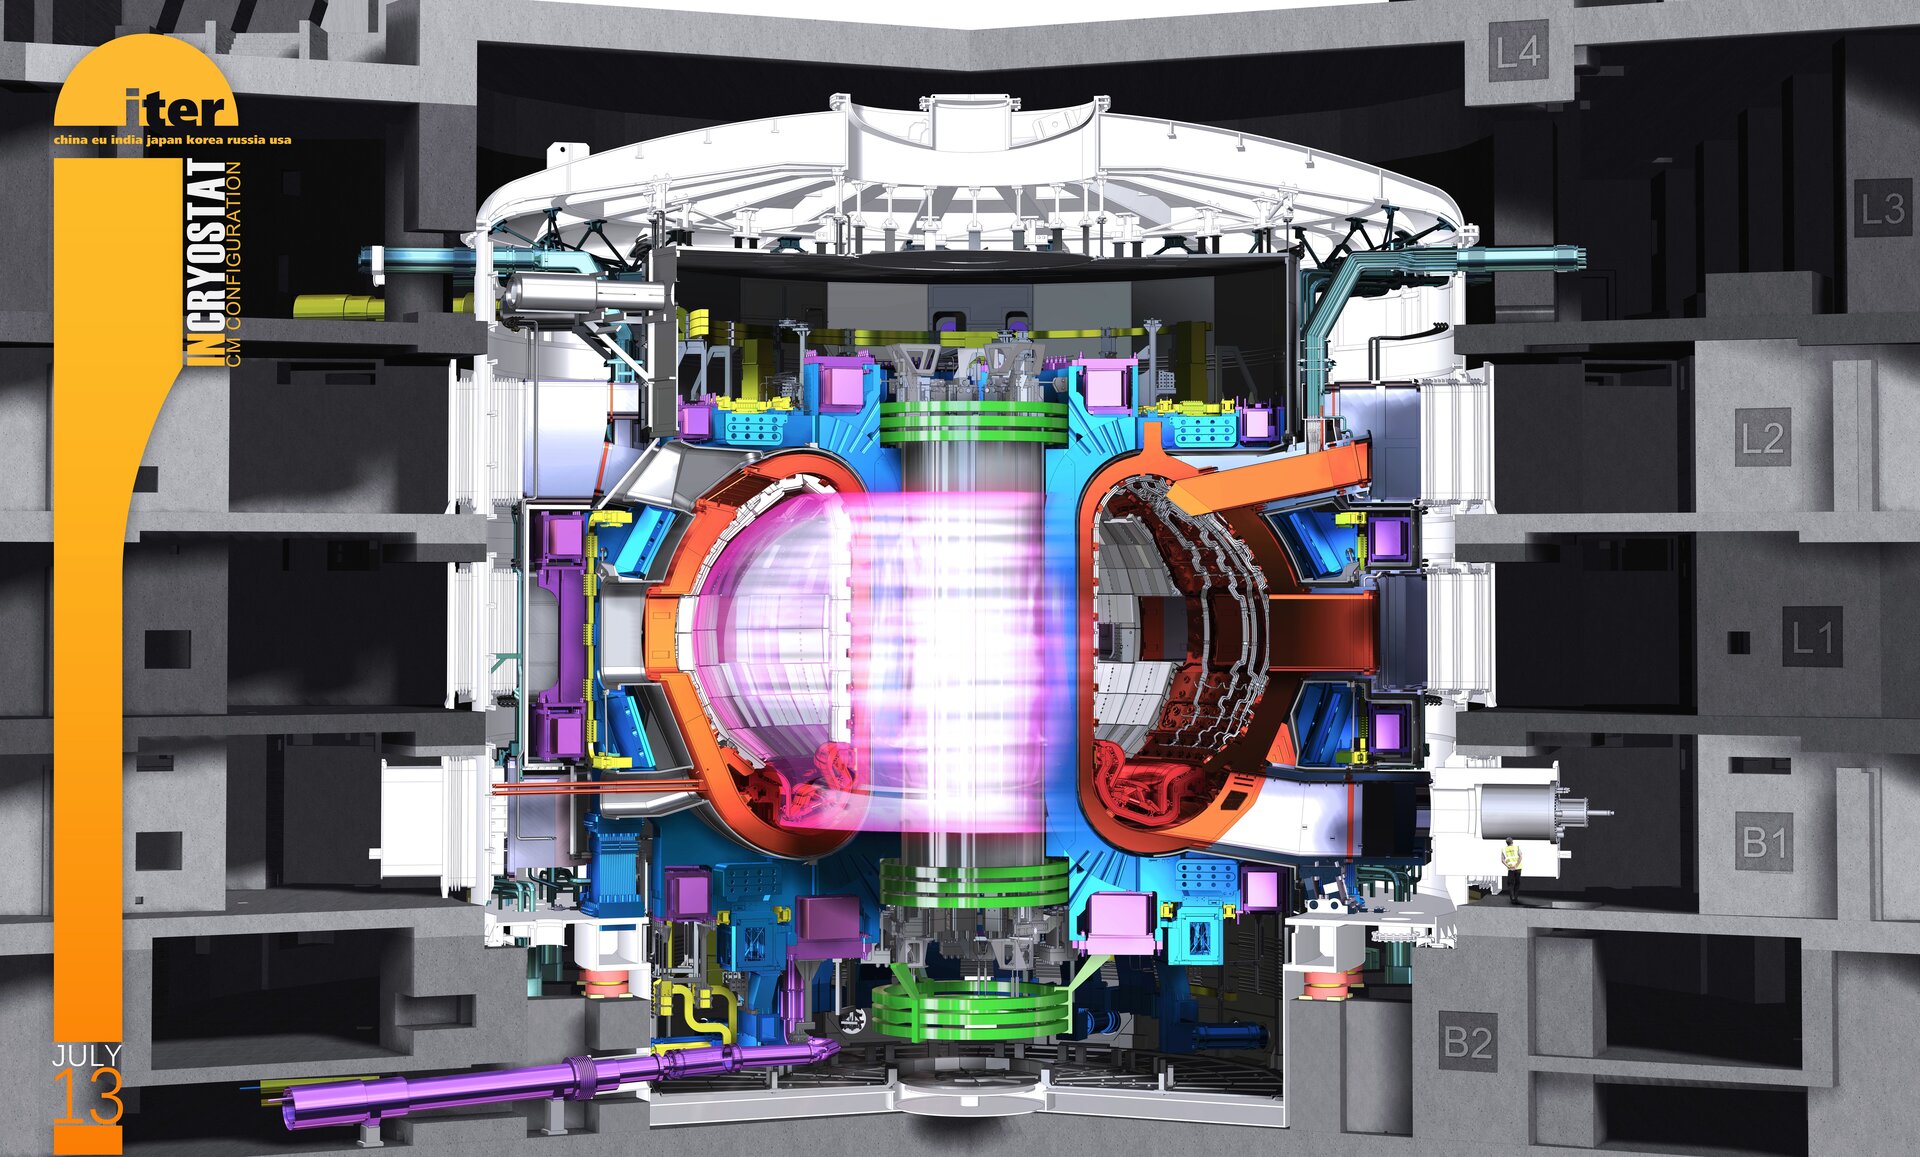 Nuclear fusion to generate green energy